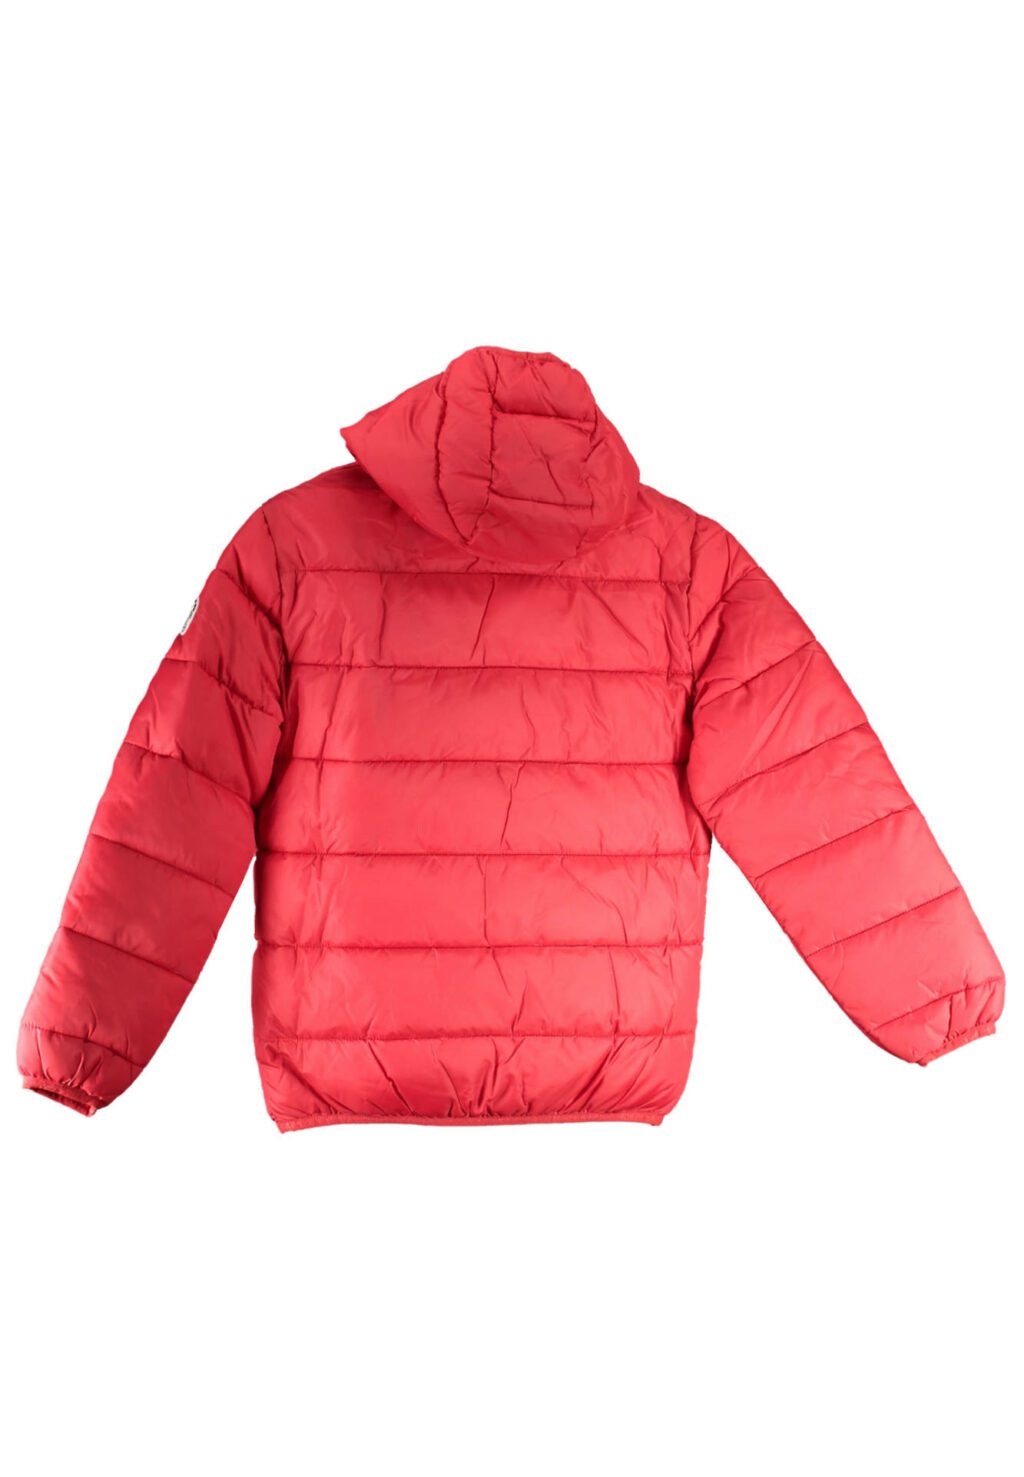 NORTH SAILS RED KIDS JACKET 901194-000_ROSSO_0236